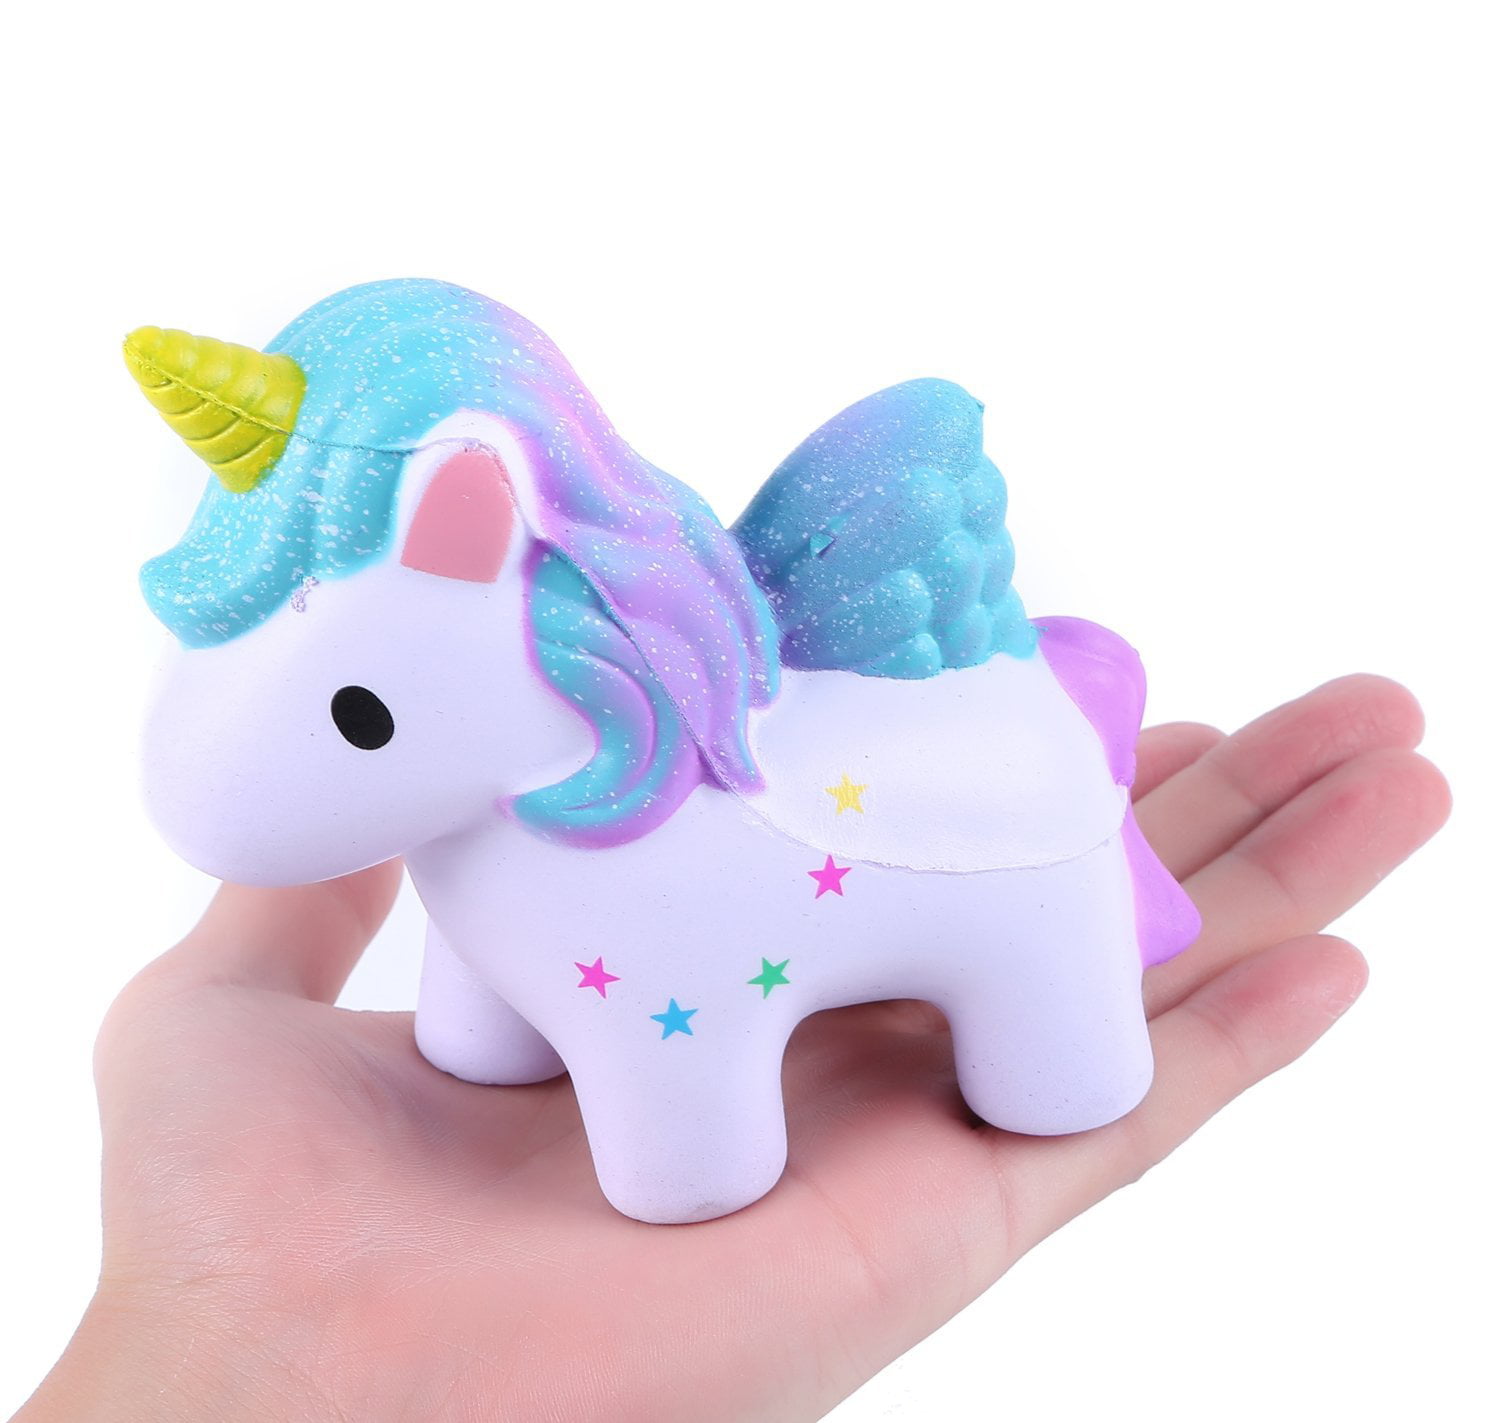 AOLIGE Squishies Slow Rising Jumbo Kawaii Cute White Unicorn Mousse Cake Creamy Scent for Kids Party Toys Stress Reliever Toy 